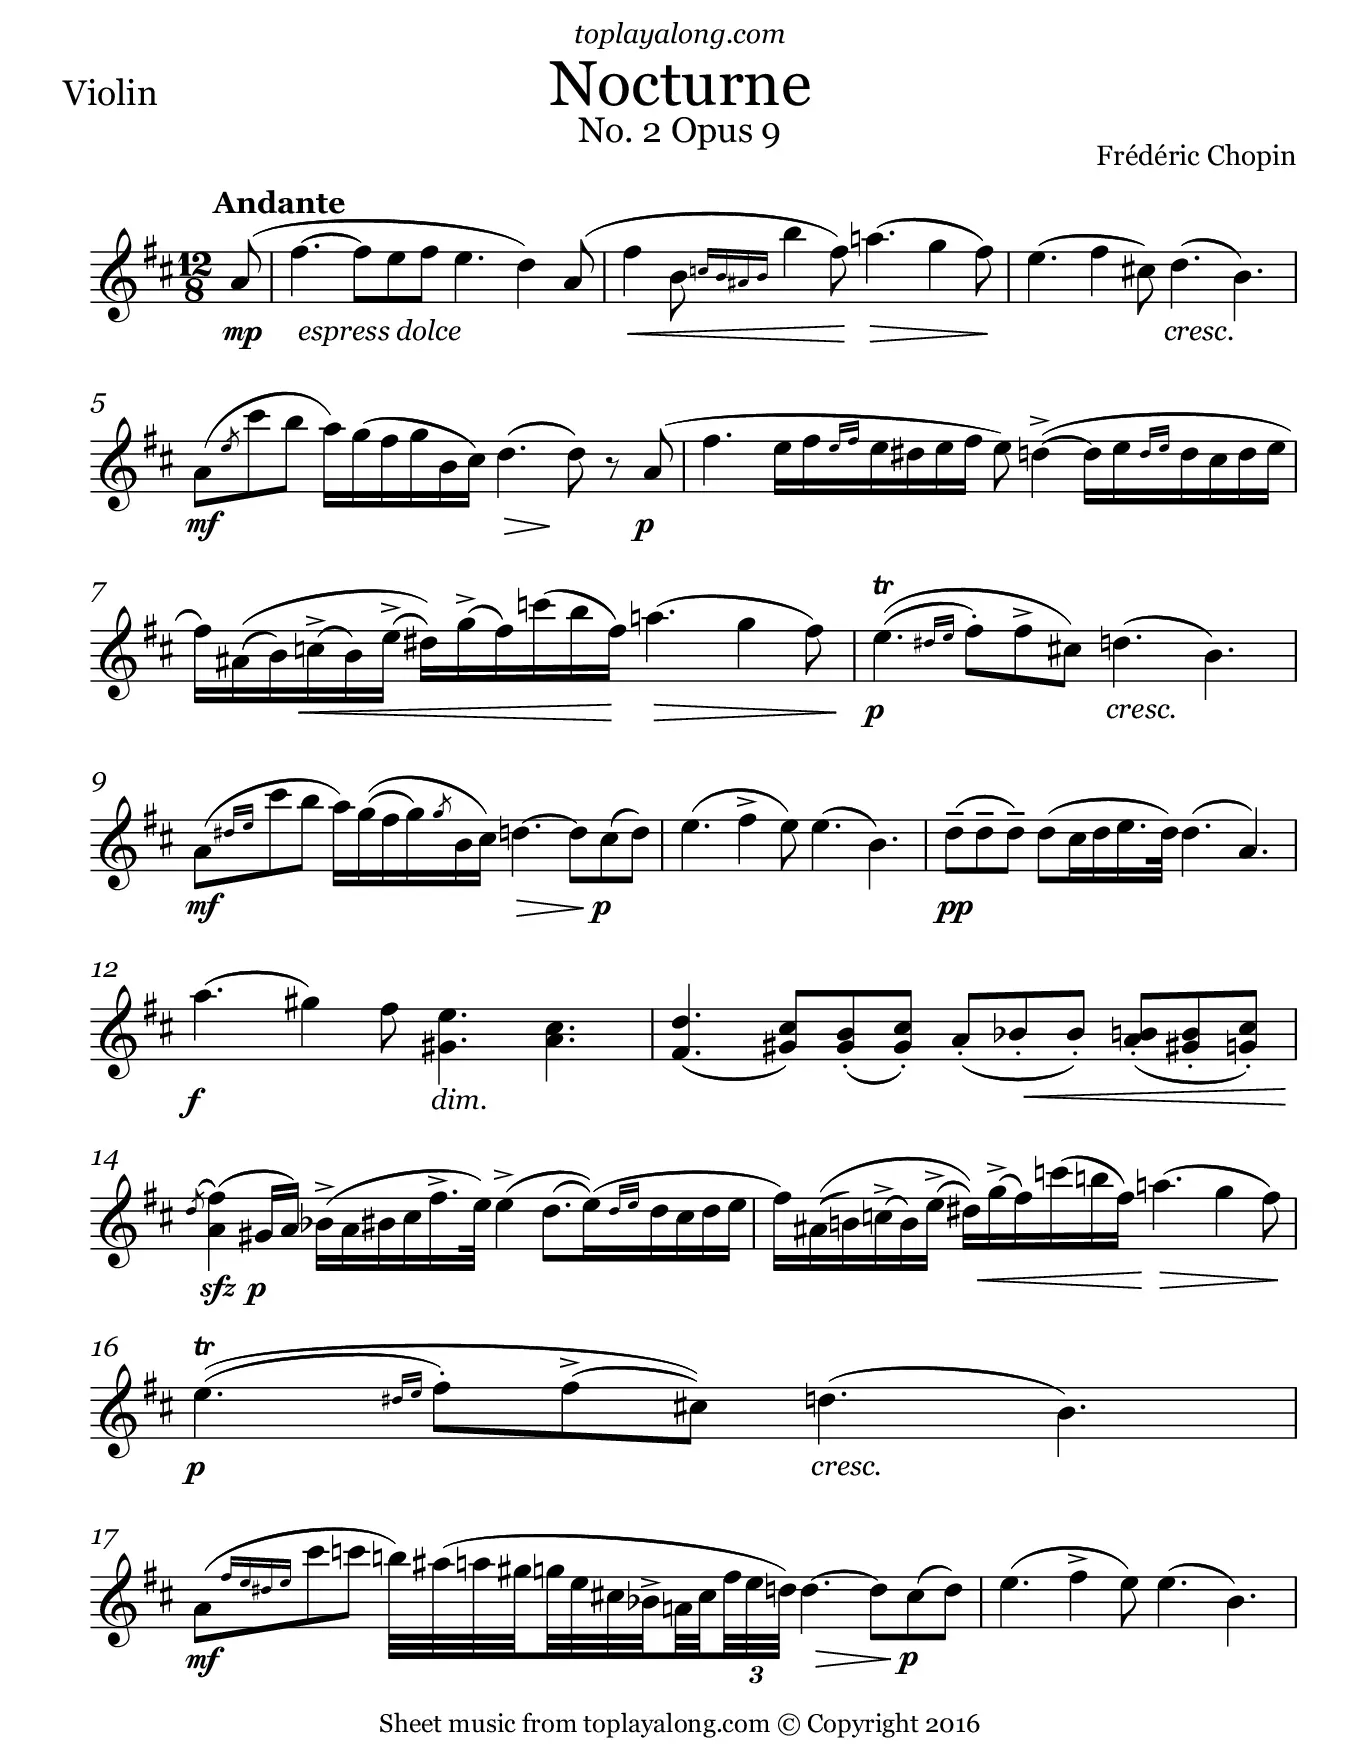 chopin nocturne violin solo - What grade is Chopin Nocturne Op 9 No 2